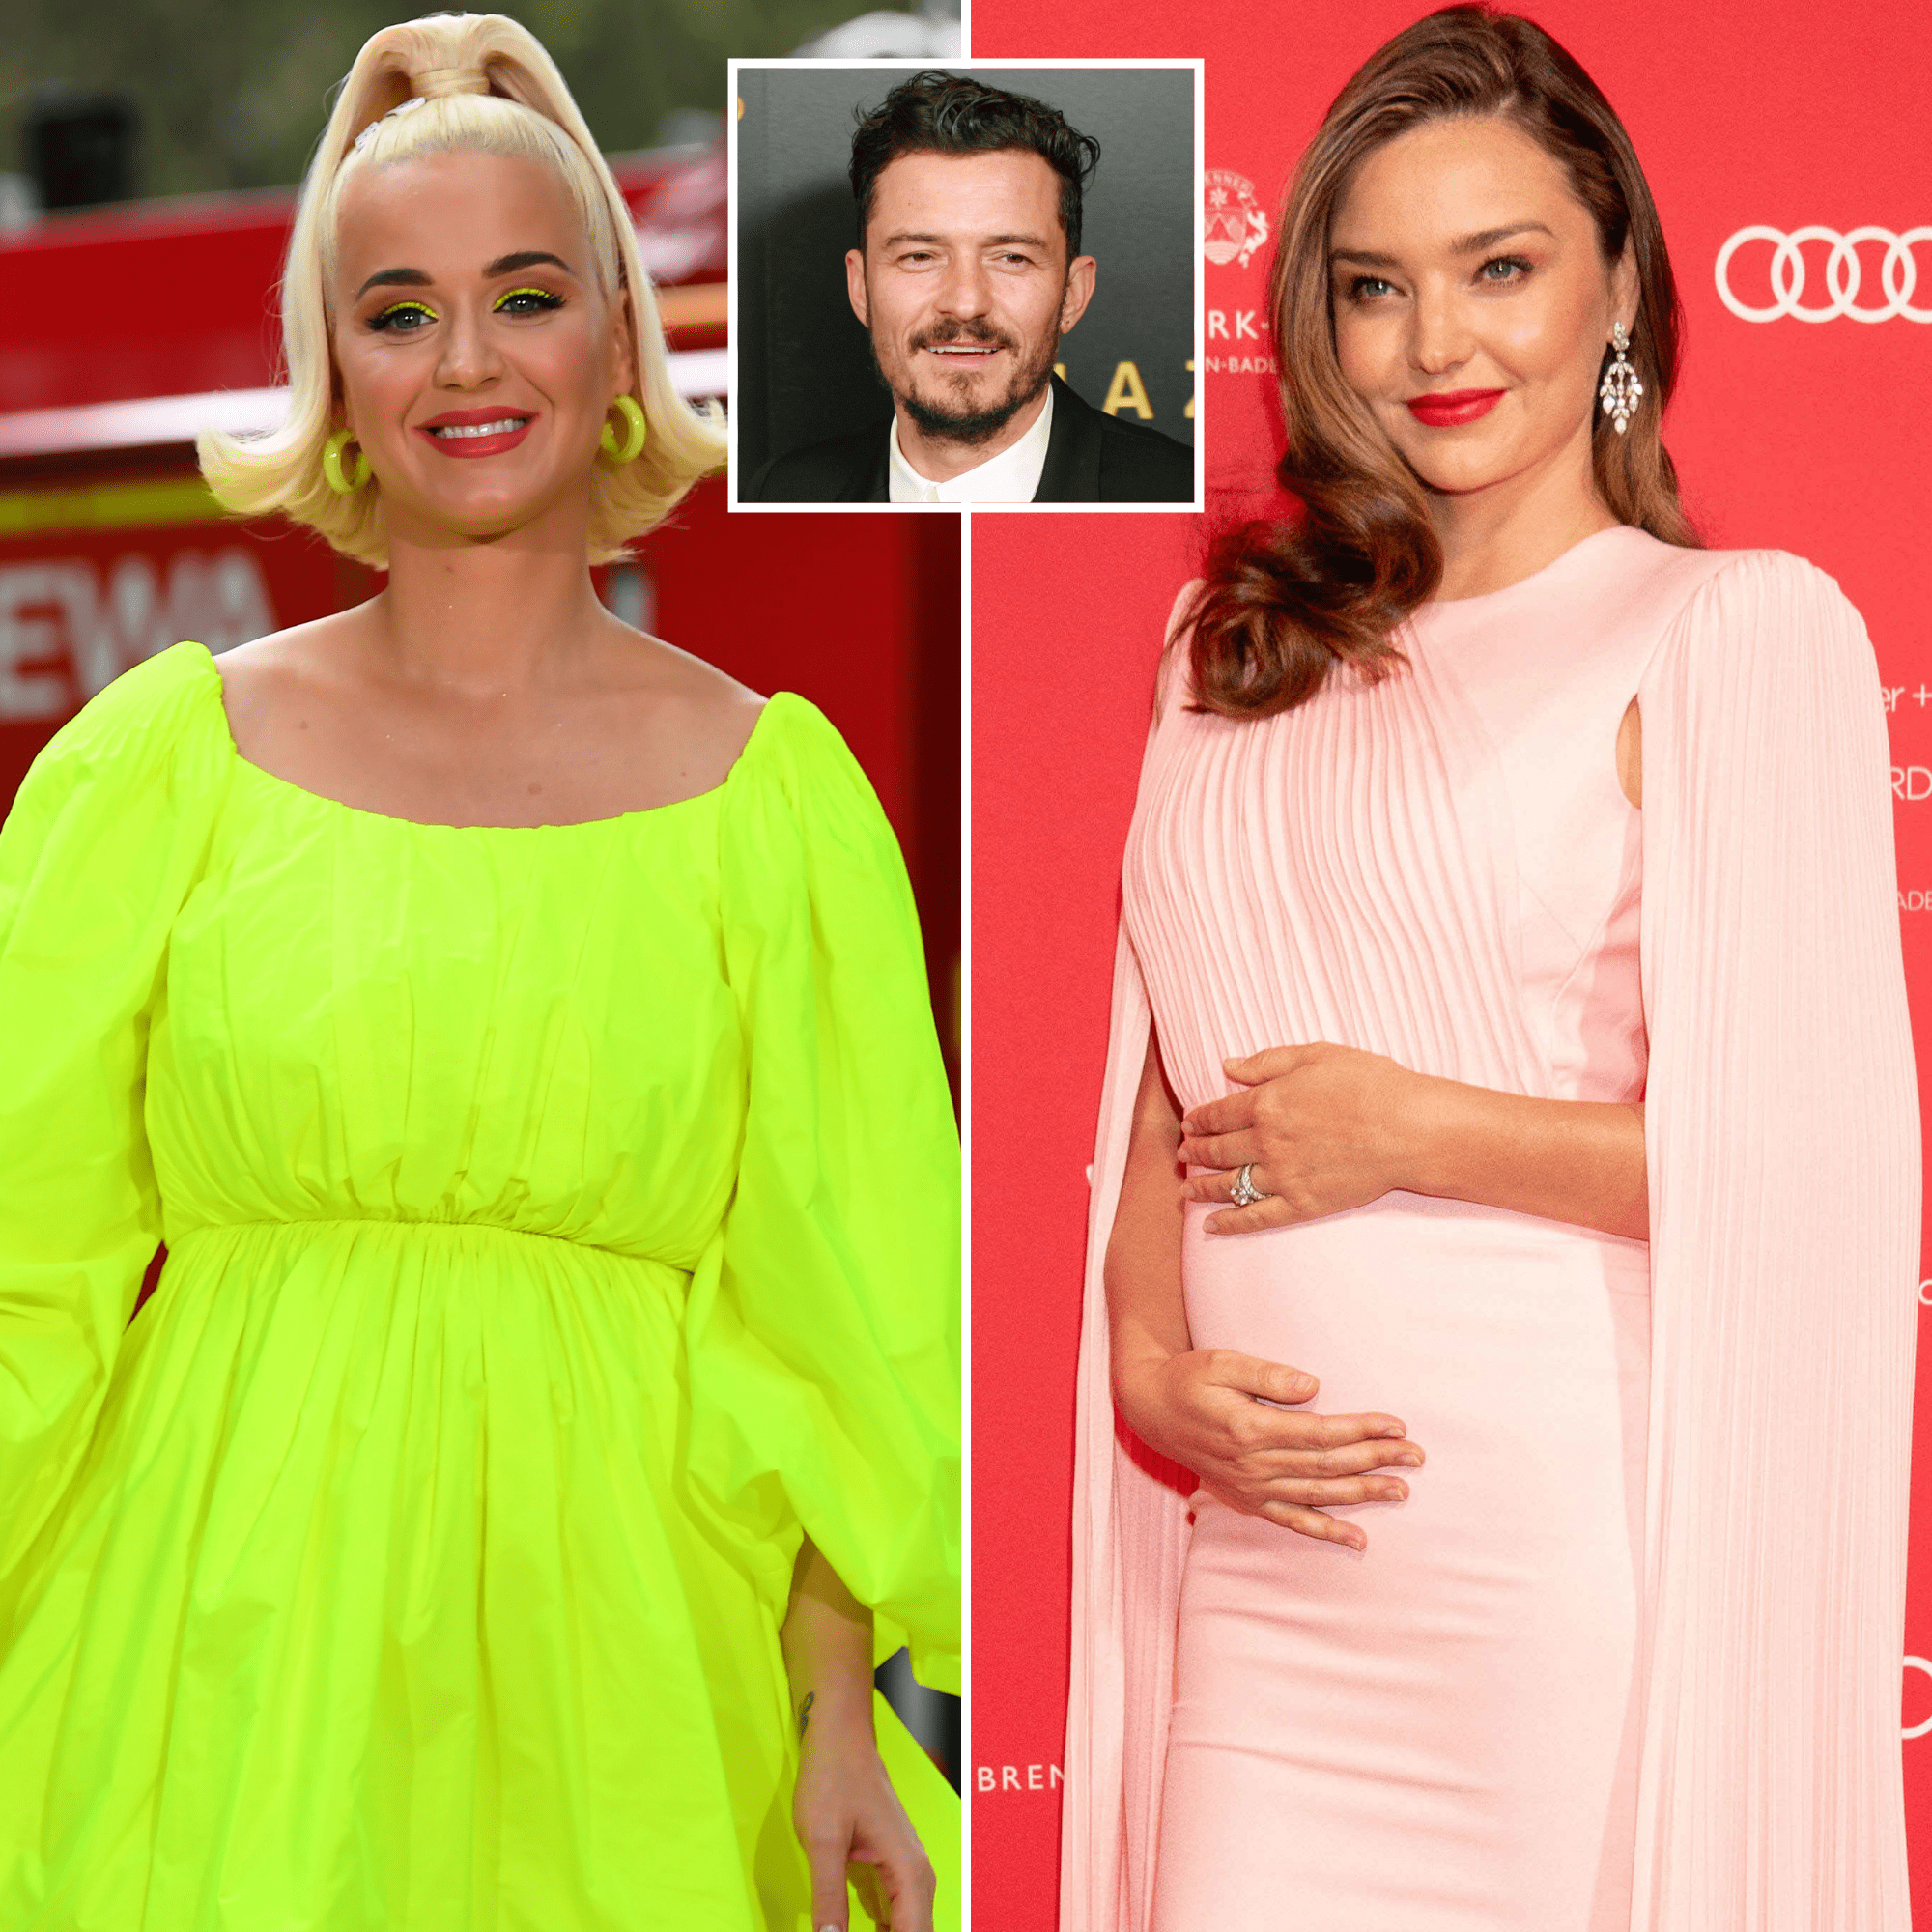 https://www.lifeandstylemag.com/wp-content/uploads/2021/04/katy-perry-miranda-kerr-close-bond-orlando-bloom.png?fit=2000%2C2000&quality=86&strip=all